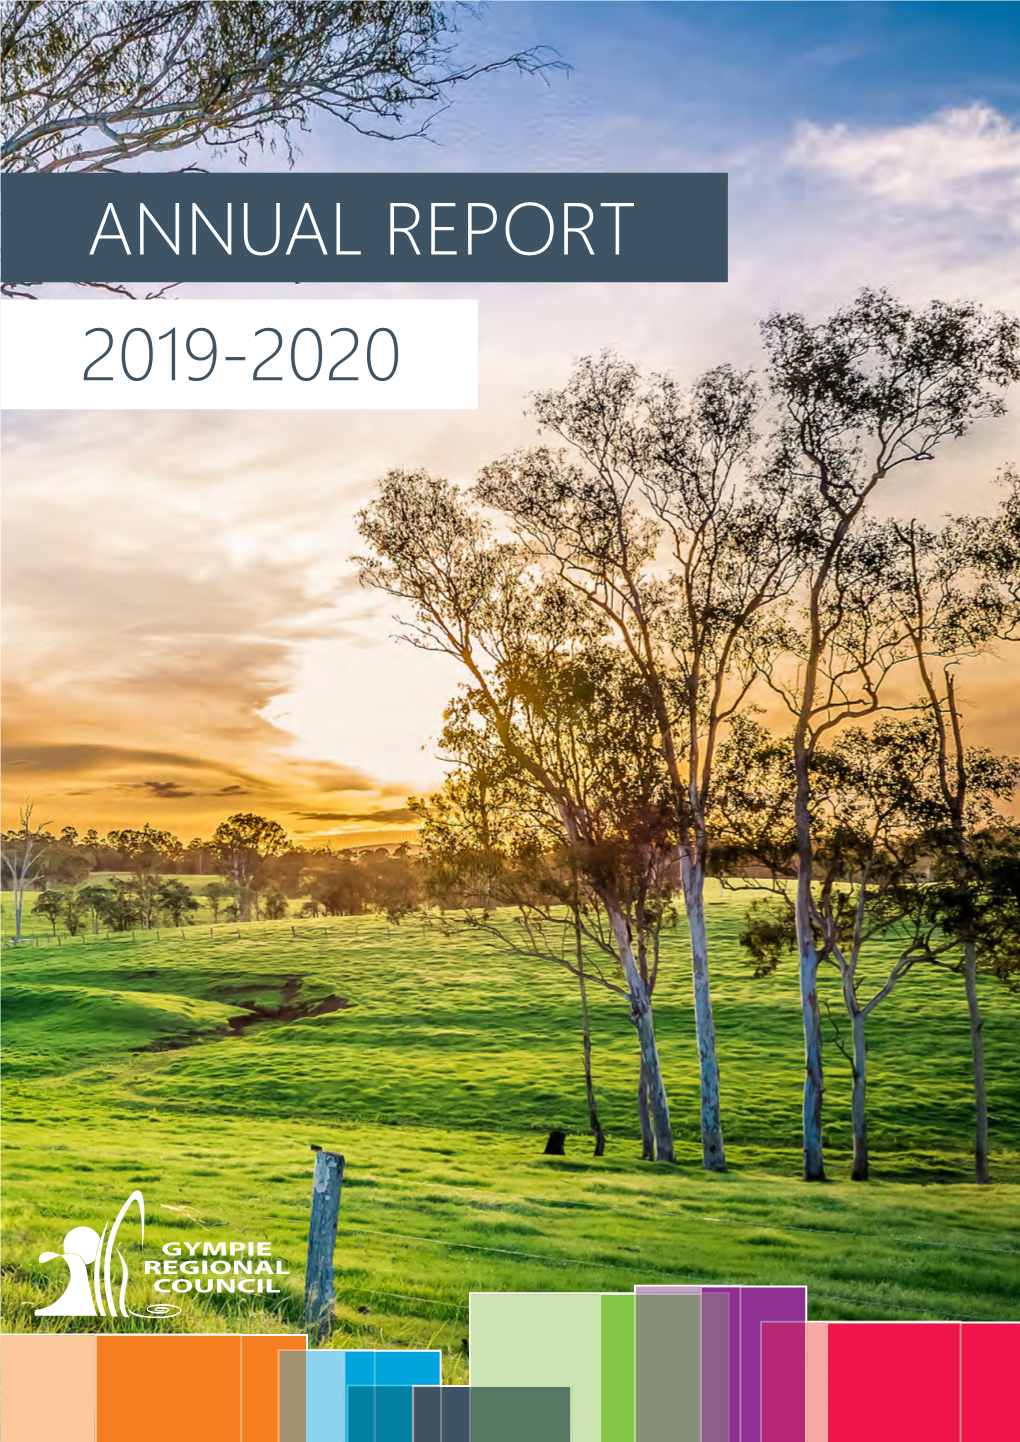 ANNUAL REPORT 2019-2020 Contents